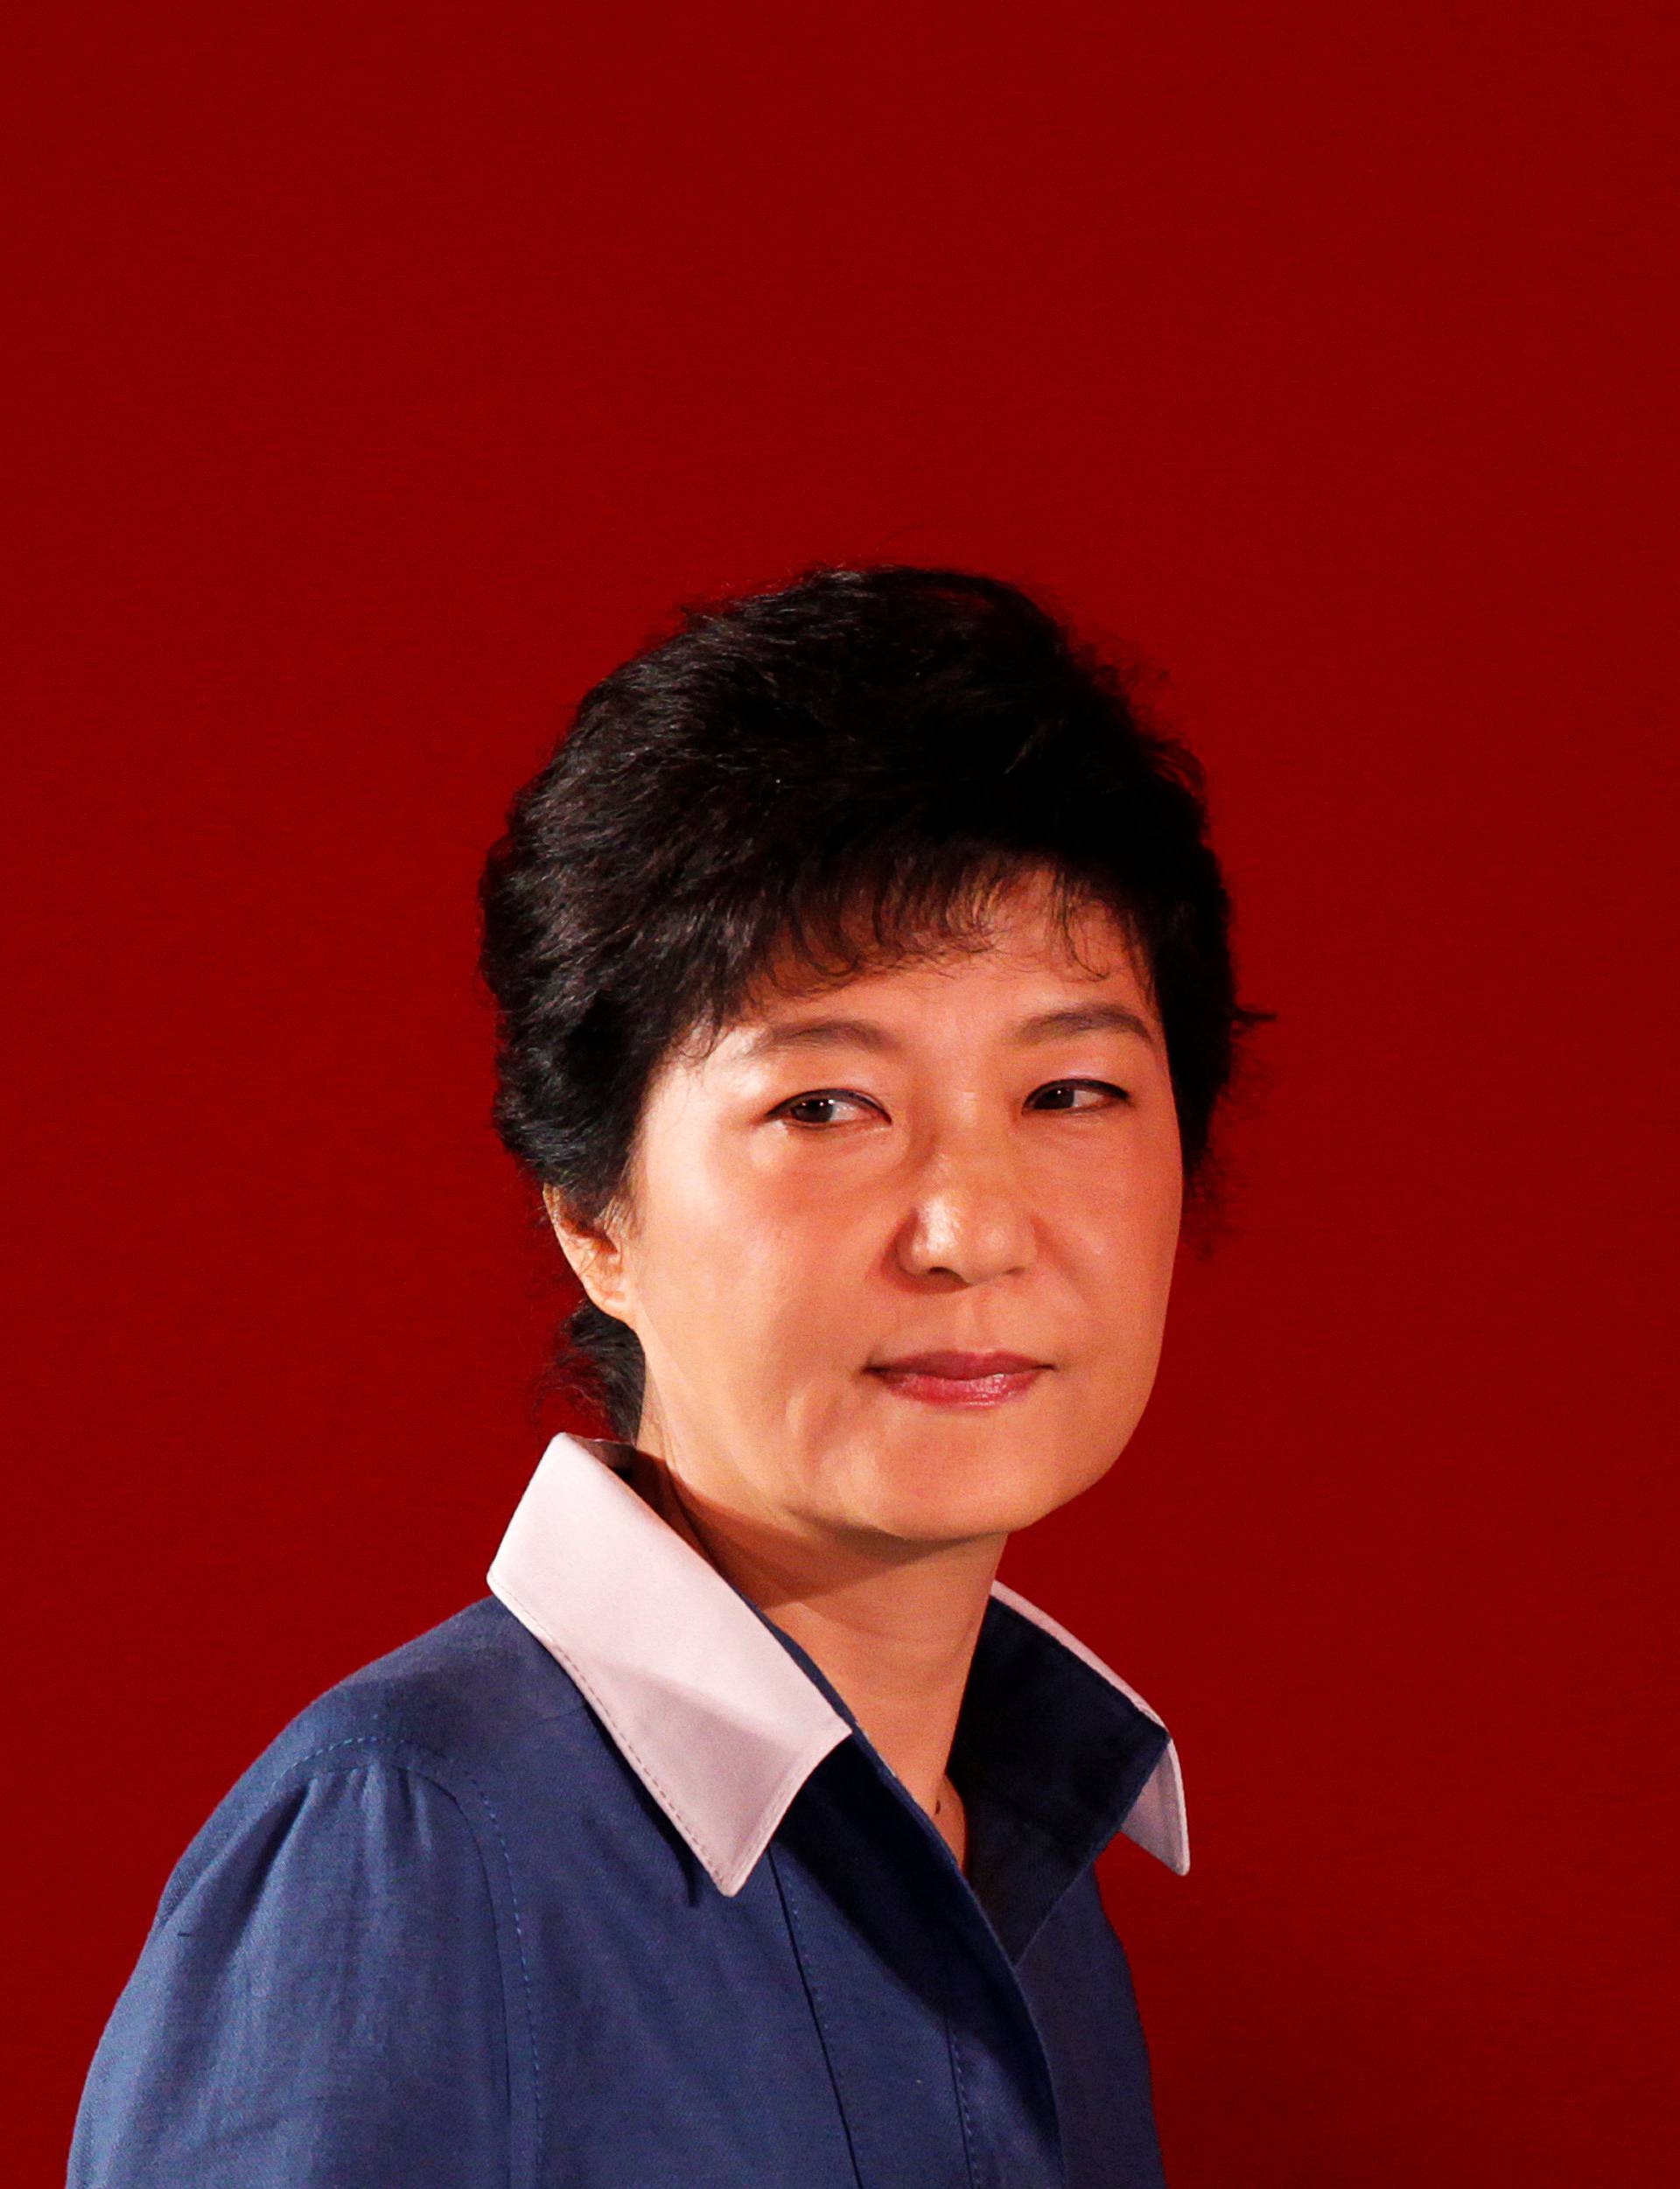 Park Geun-hye attends a national convention of the ruling Saenuri Party in Goyang